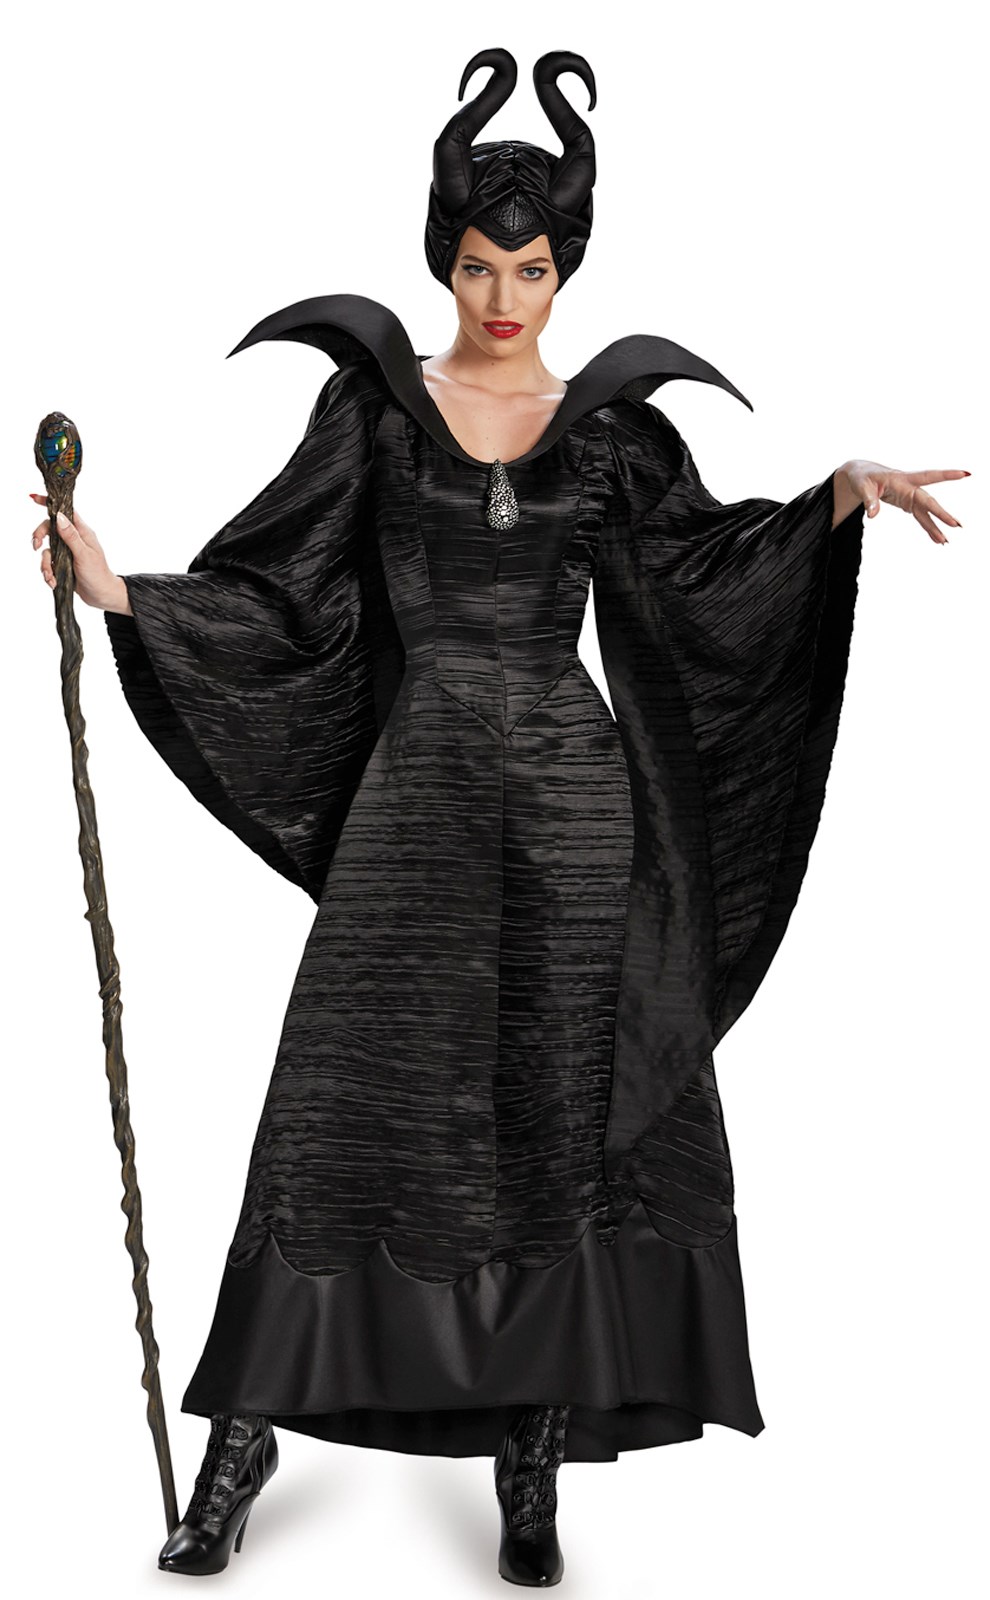 Maleficent Deluxe Christening Black Gown Adult Costume